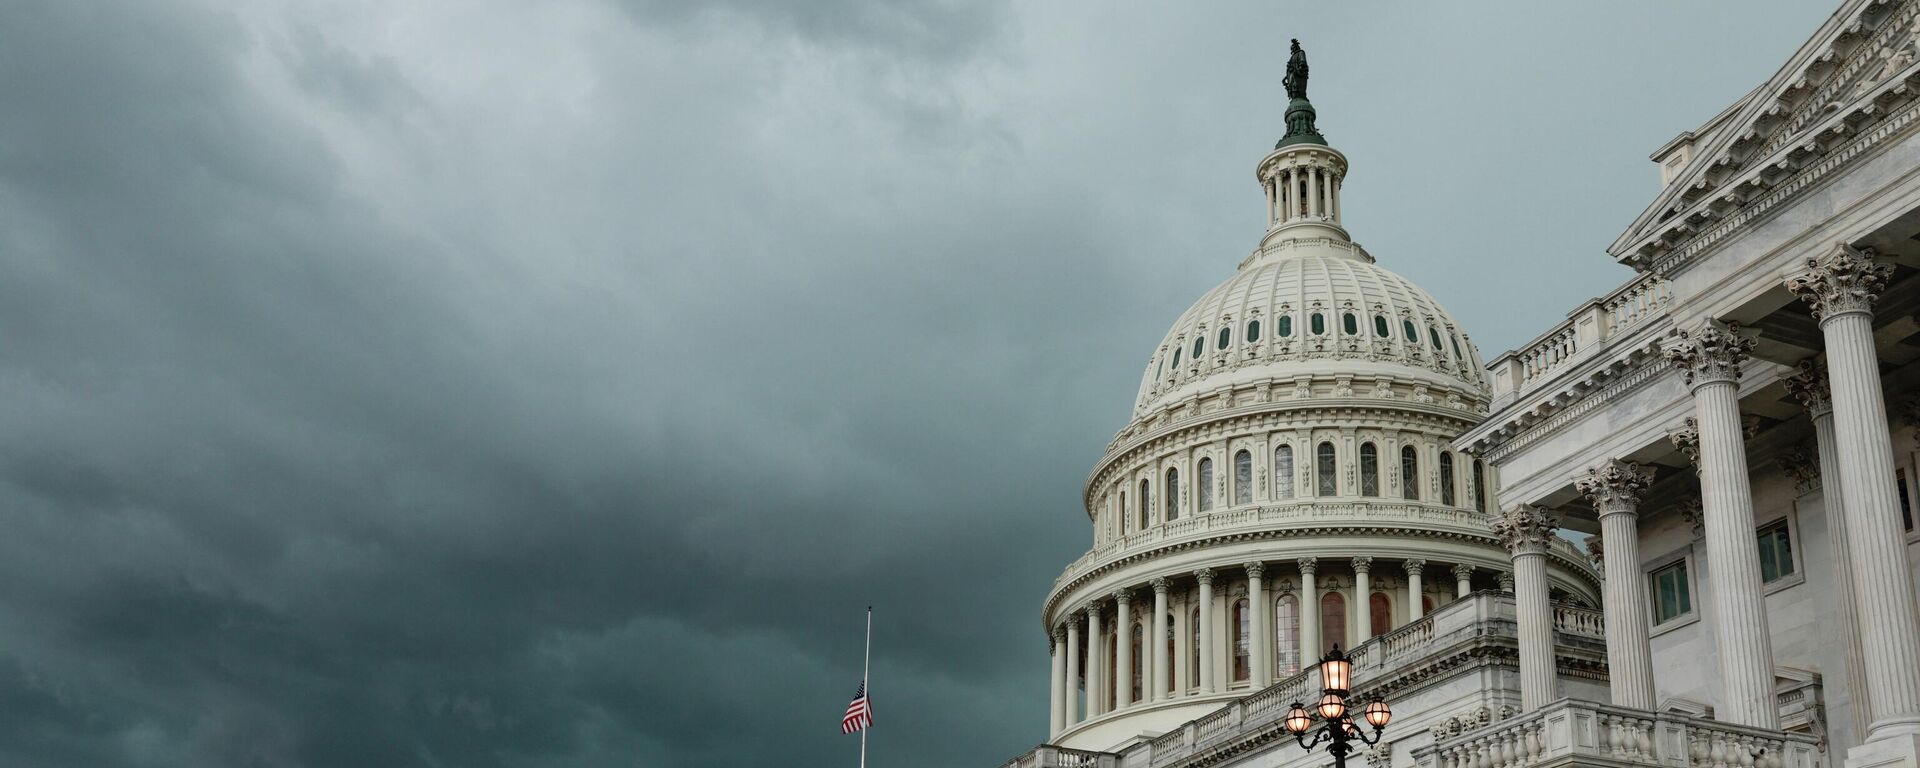 A storm cloud hangs over the U.S. Capitol Building on May 16, 2022 in Washington, DC. - Sputnik International, 1920, 19.05.2022